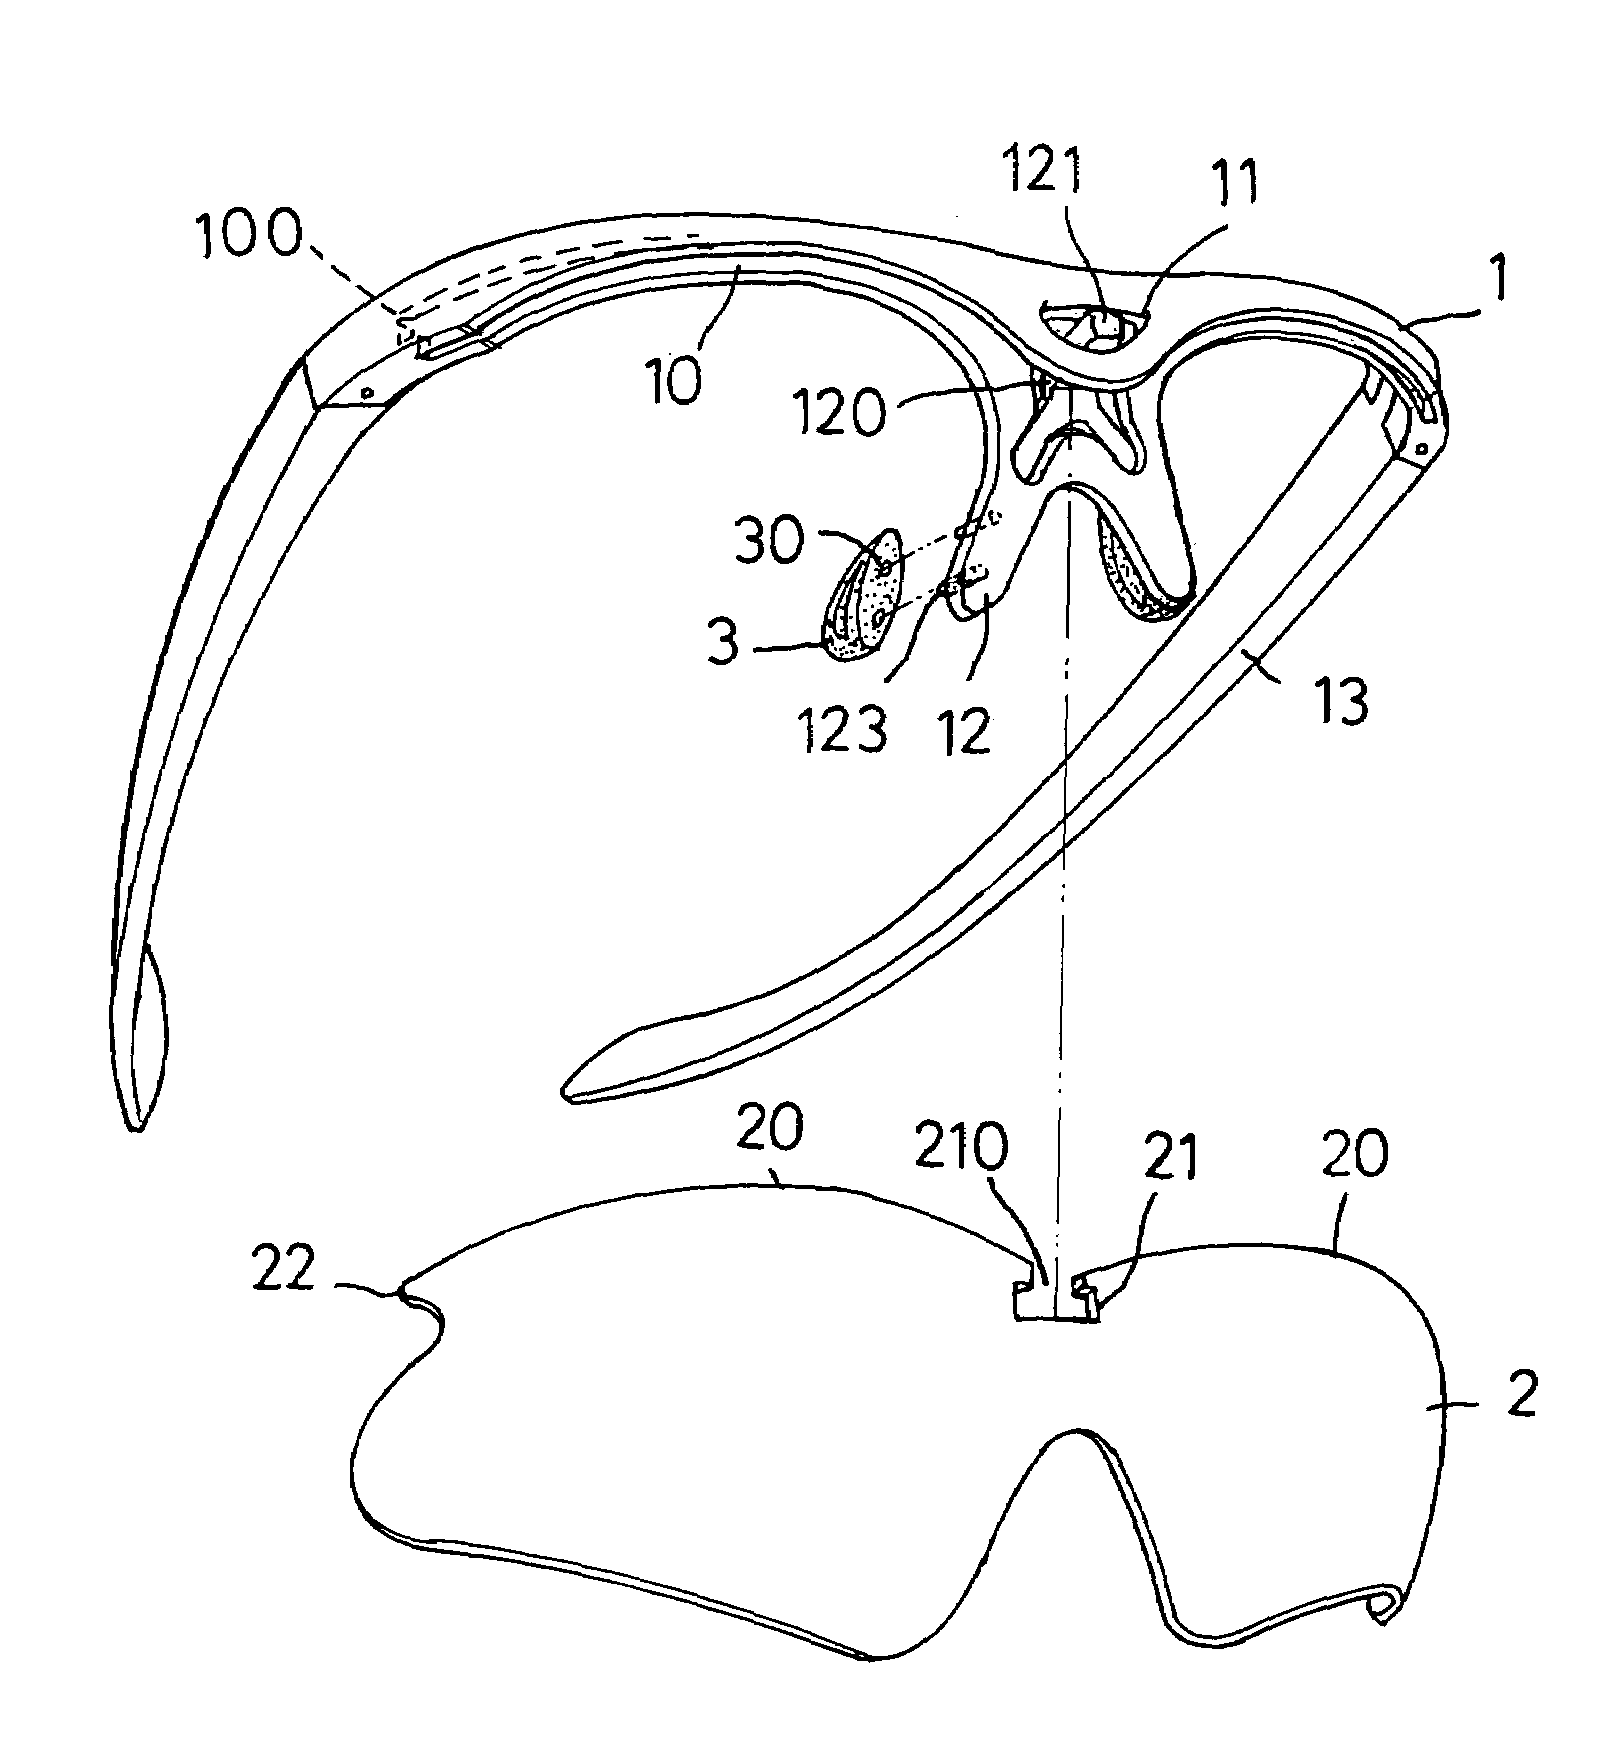 Eyeglasses with lenses changeable